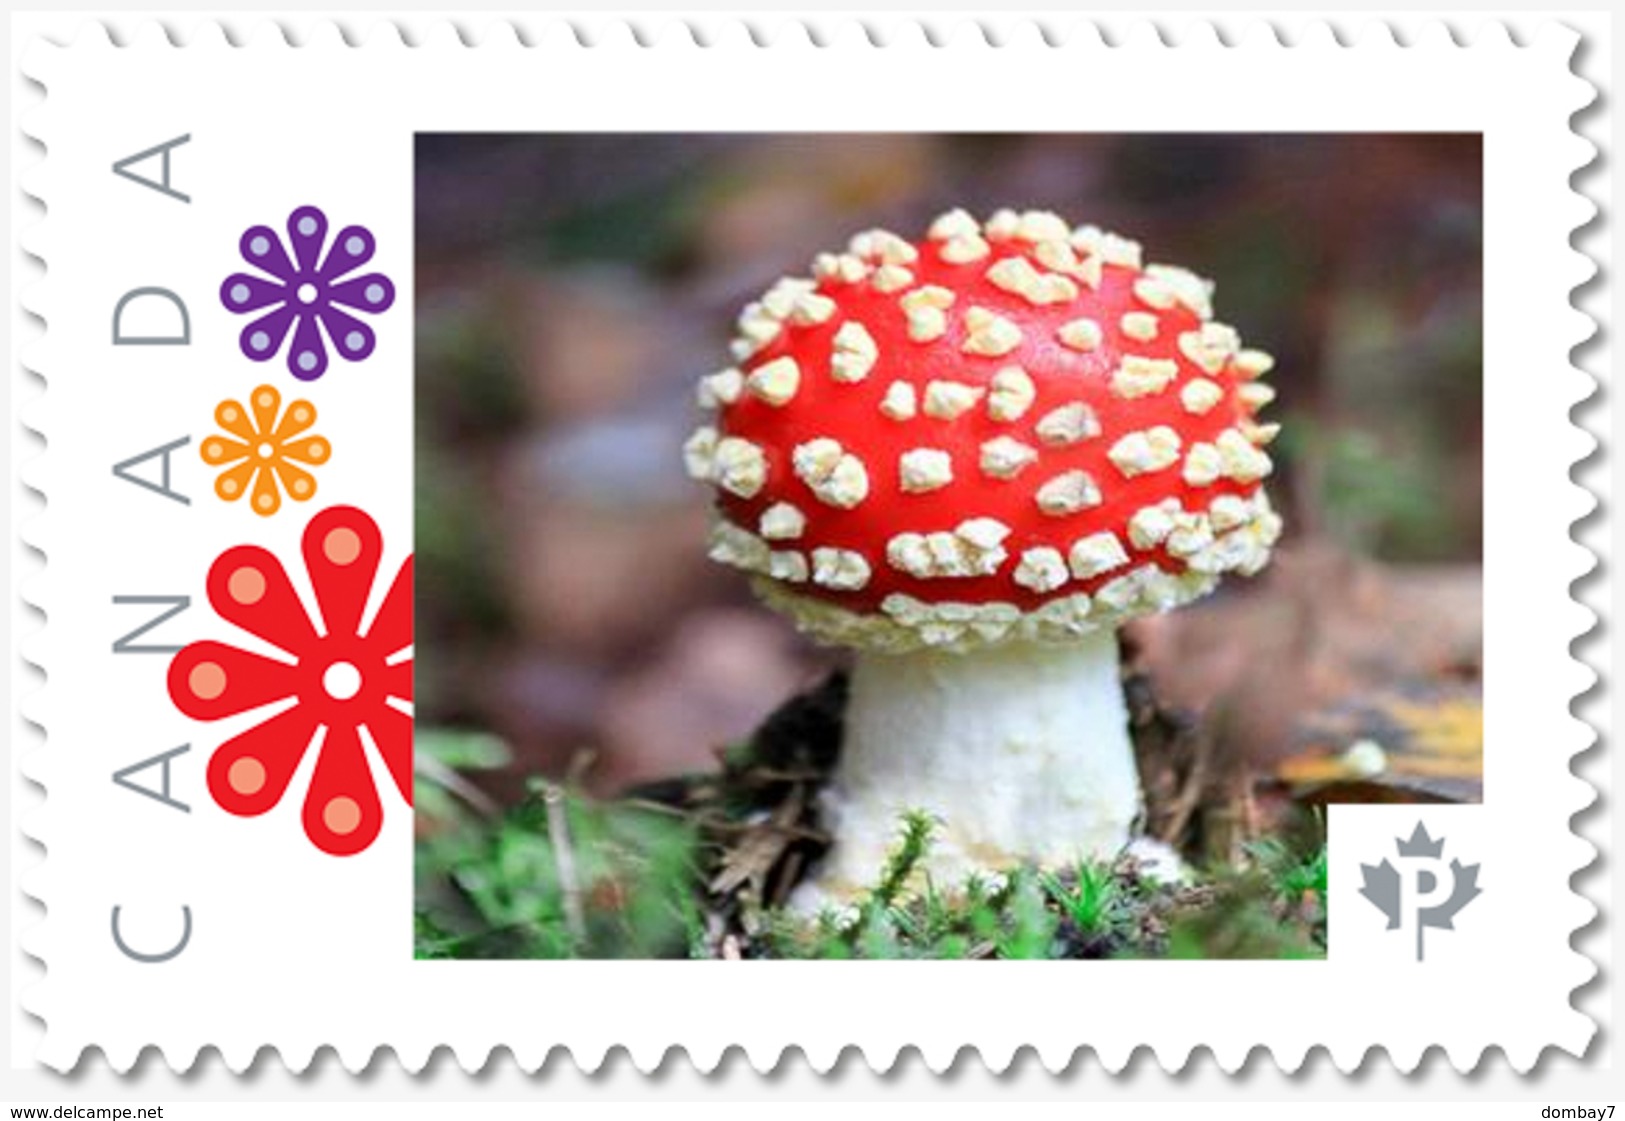 Young FLY AGARIC MUSHROOM = Picture Postage Stamp MNH Canada 2018 [p18-09-09] - Mushrooms